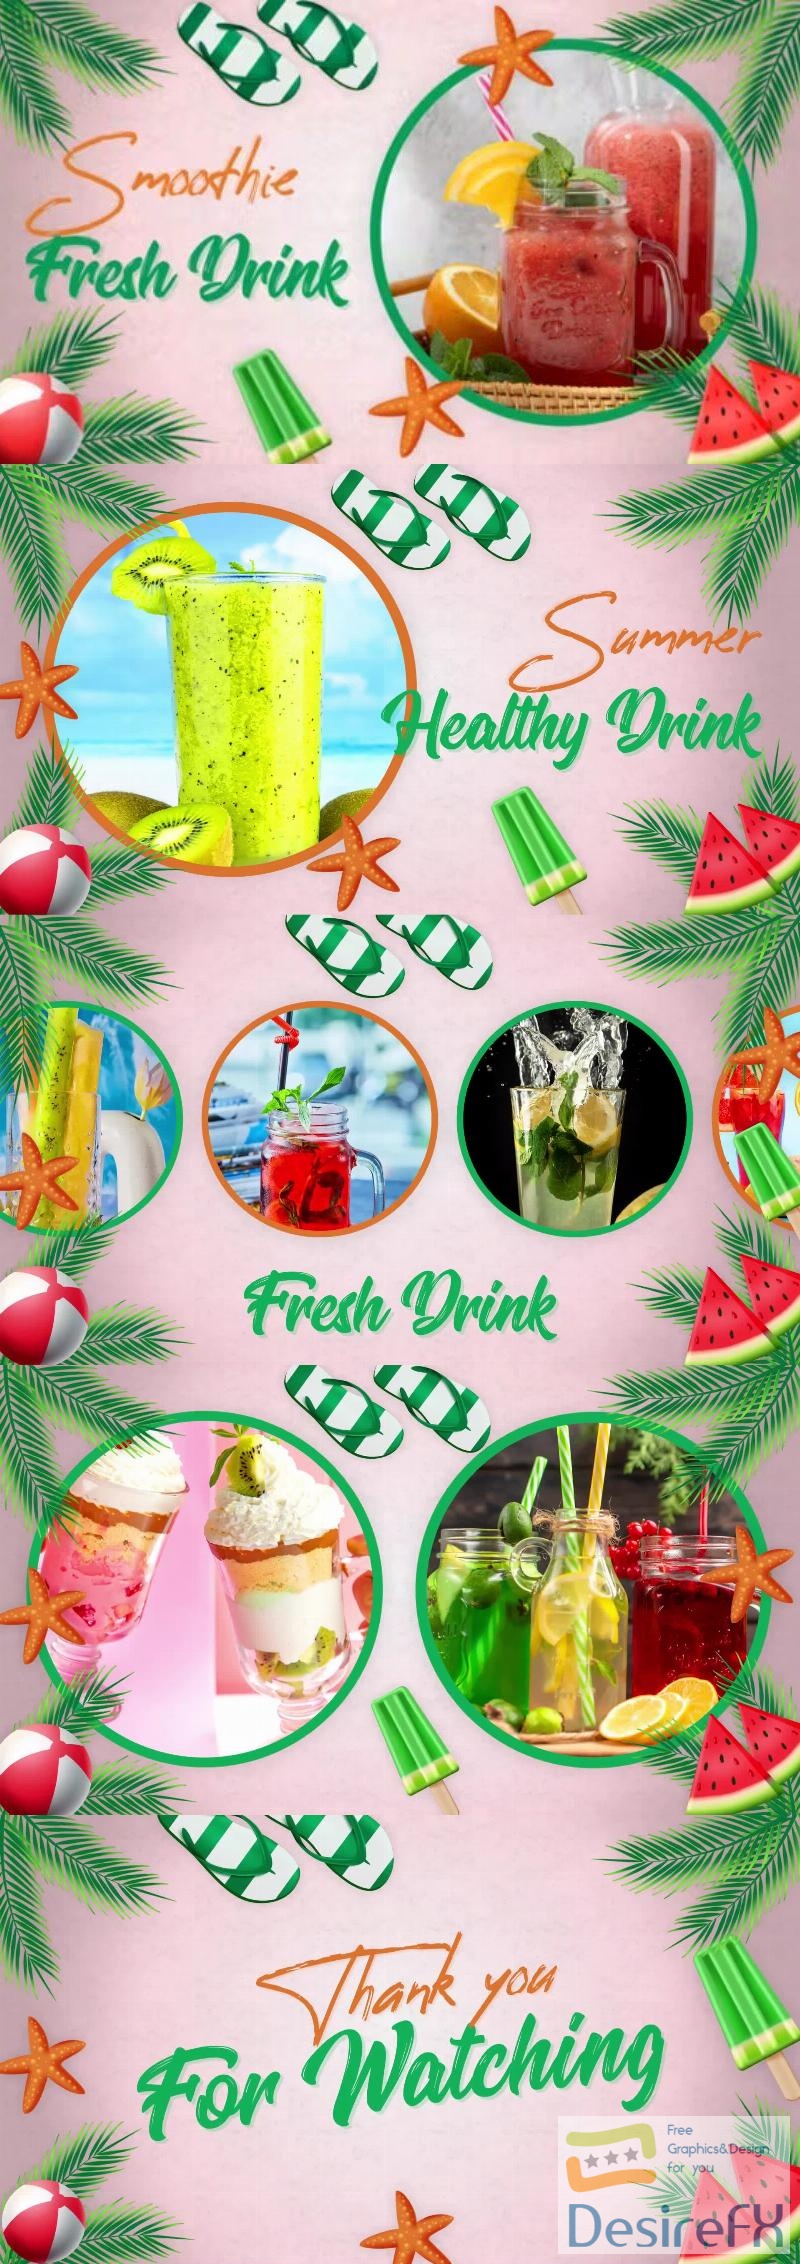 Videohive Fresh and Healthy Drink Promo 45149572